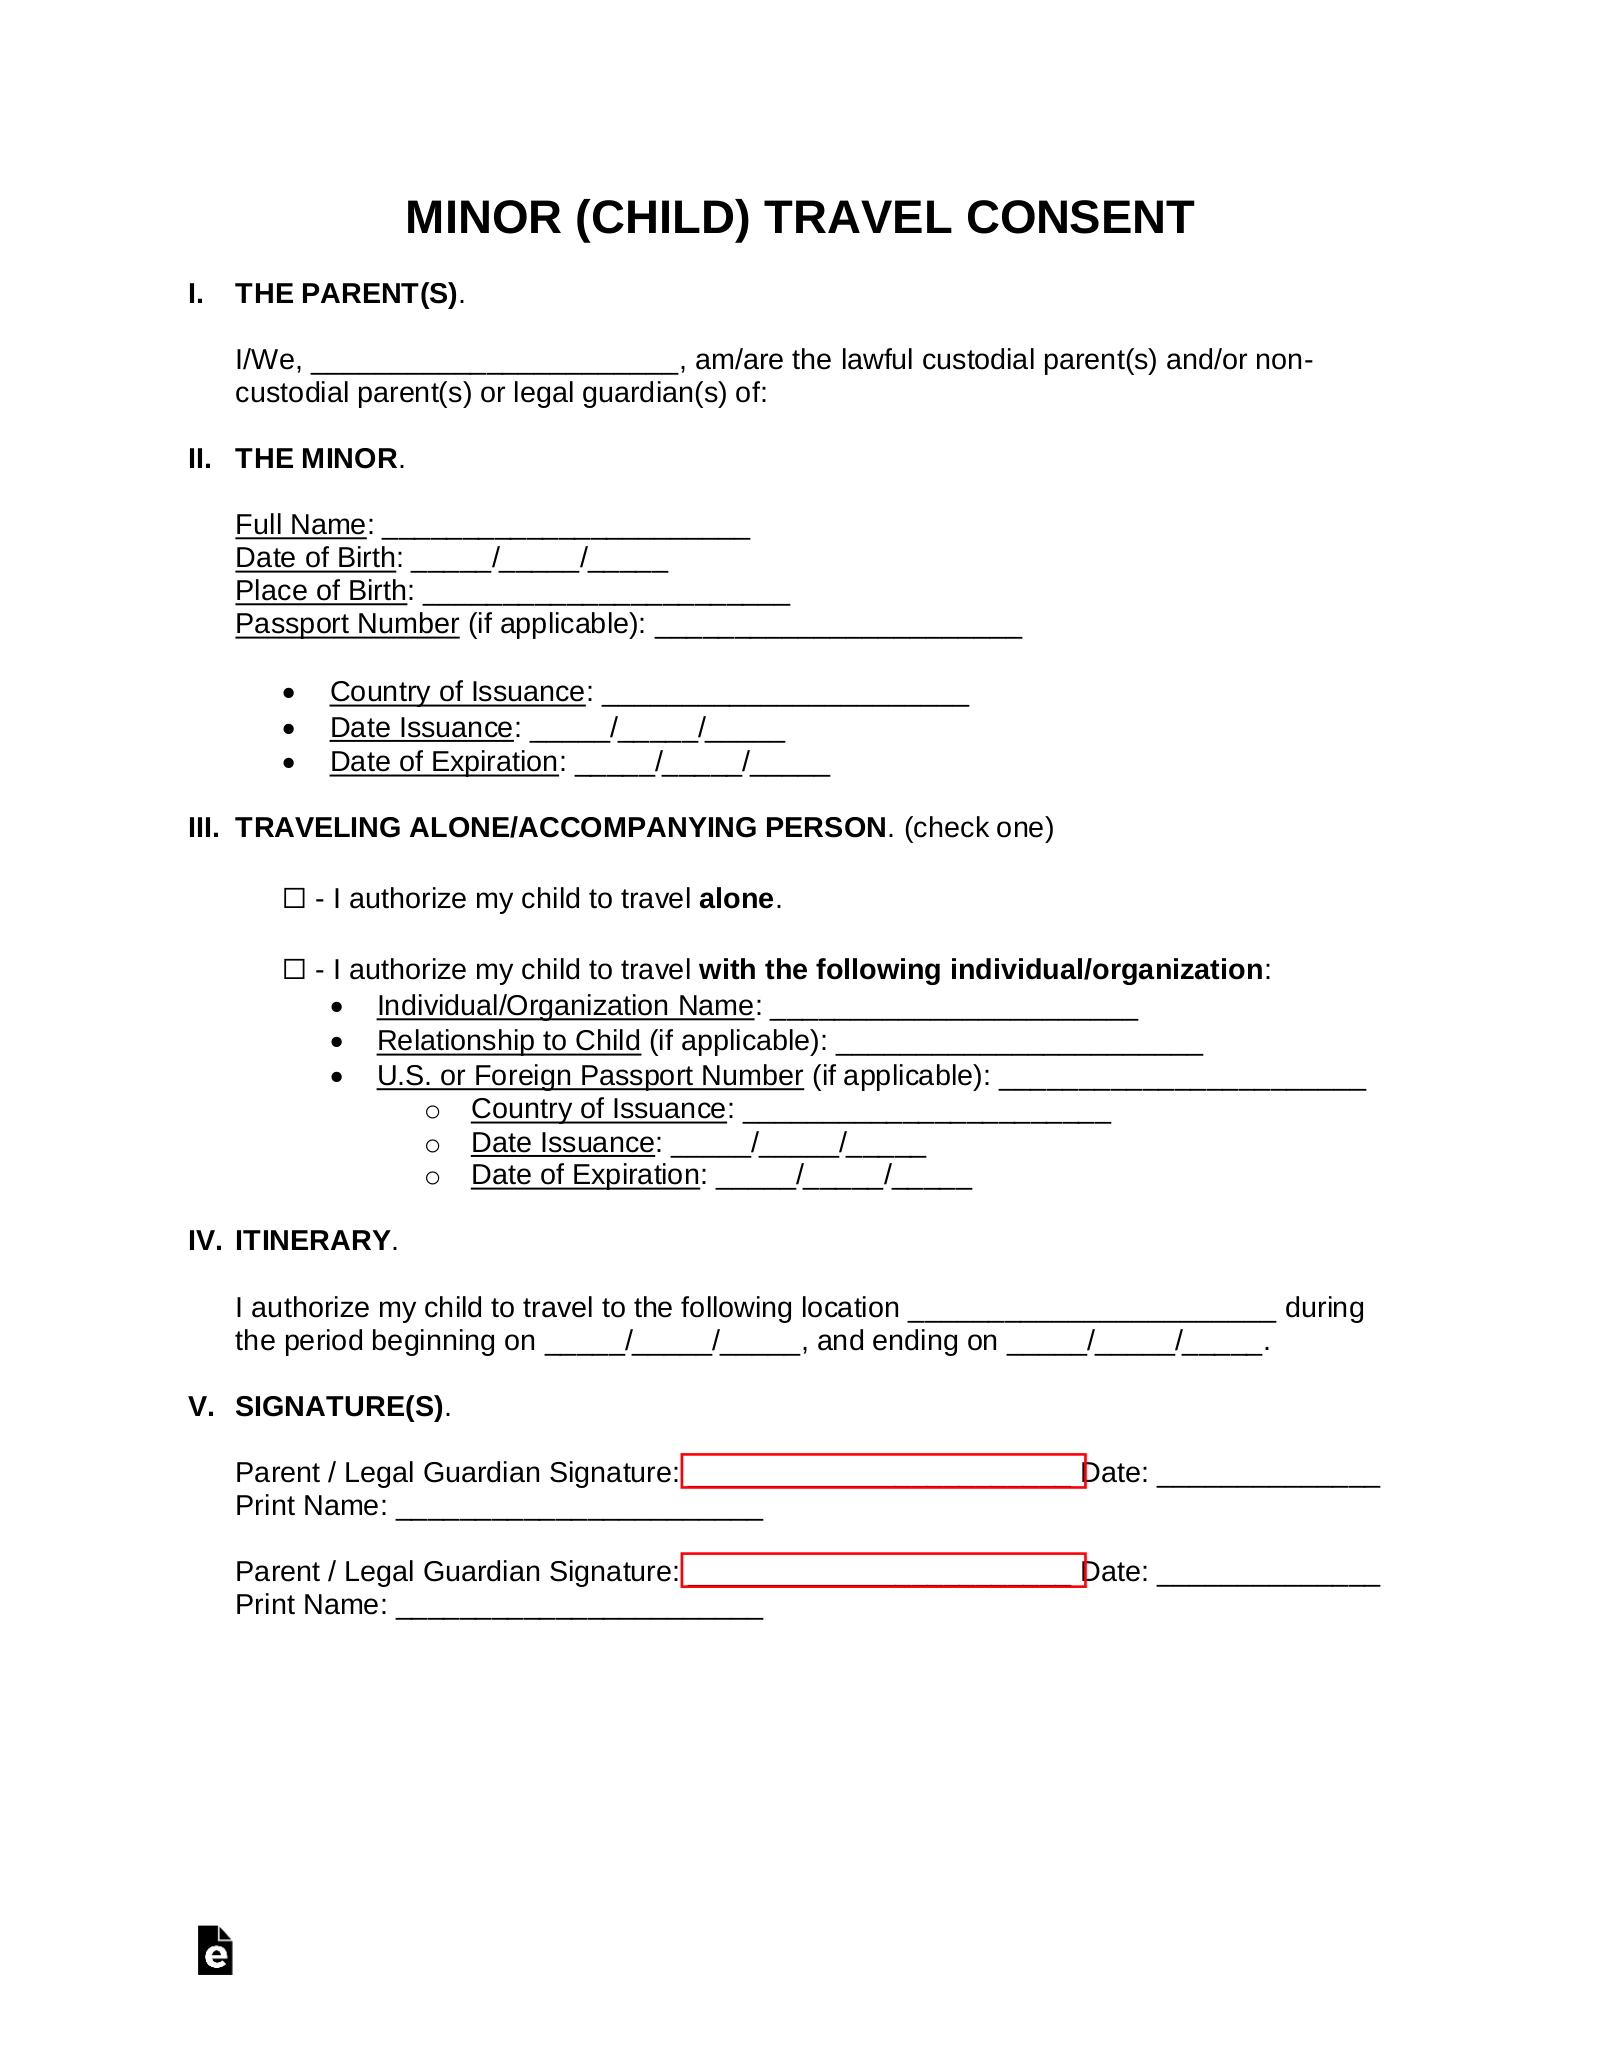 minor international travel consent form with notary